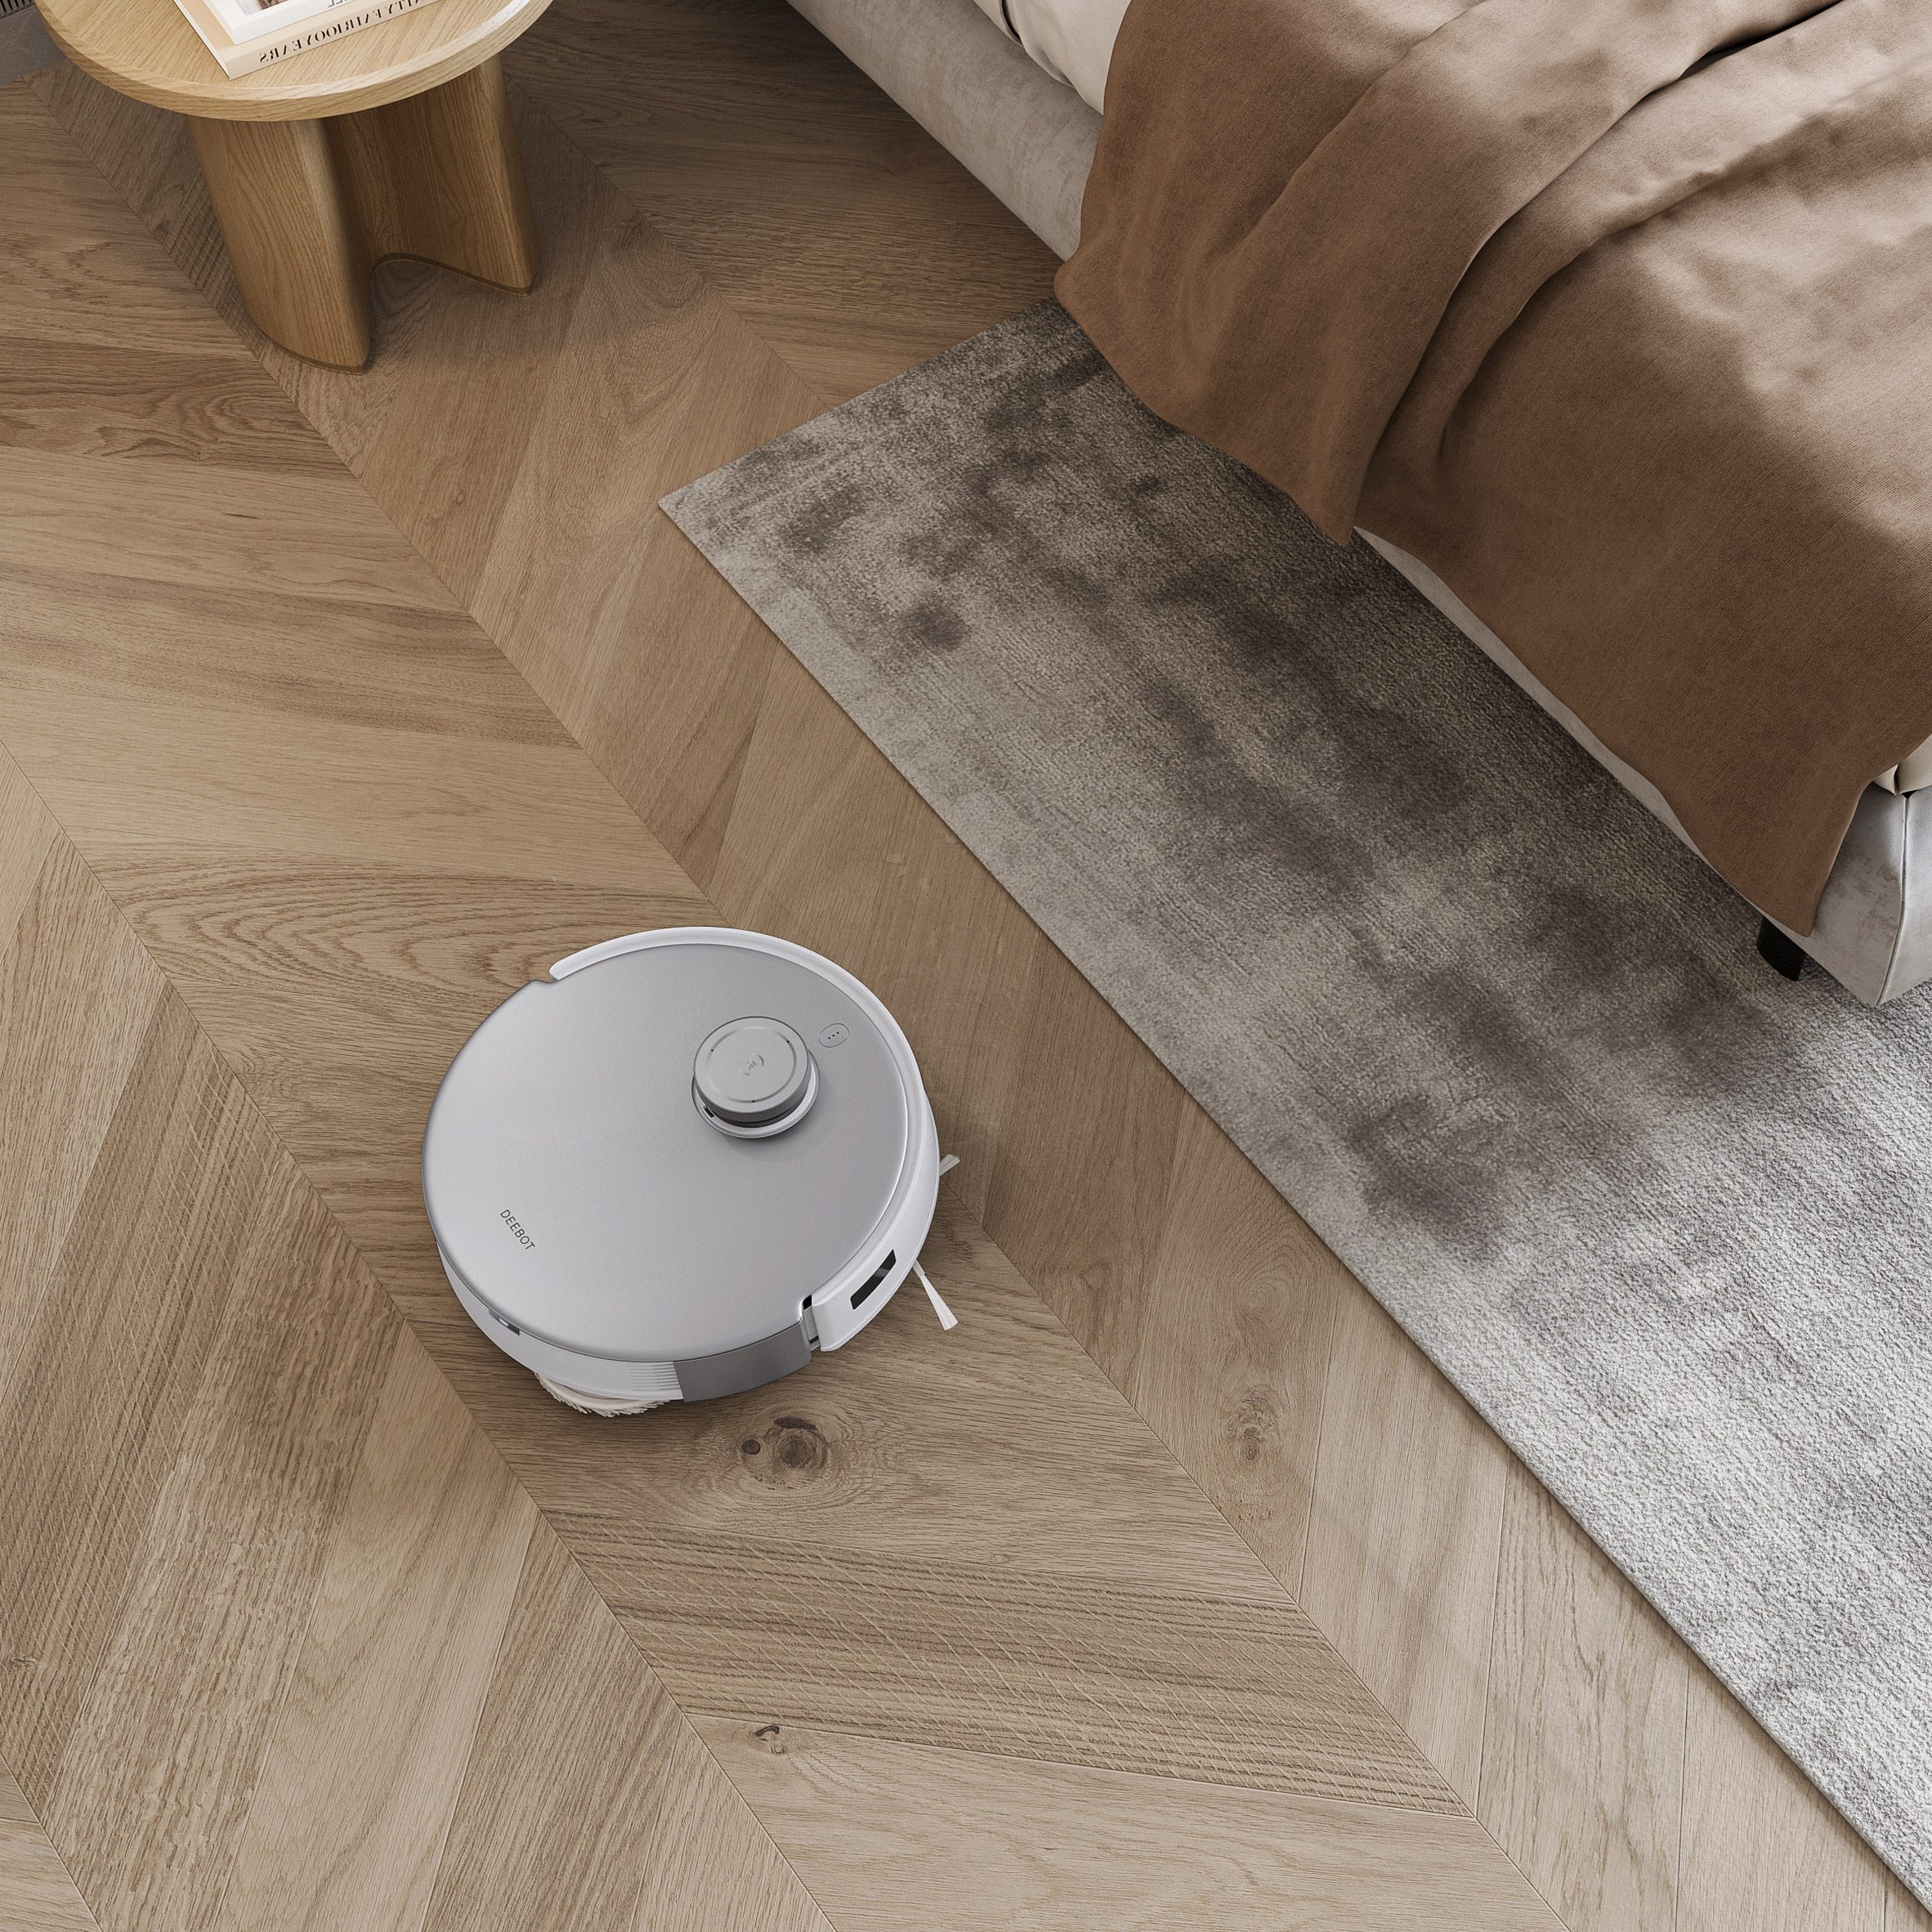 DEEBOT : Robot Vacuum Cleaners And Mops-ECOVACS US